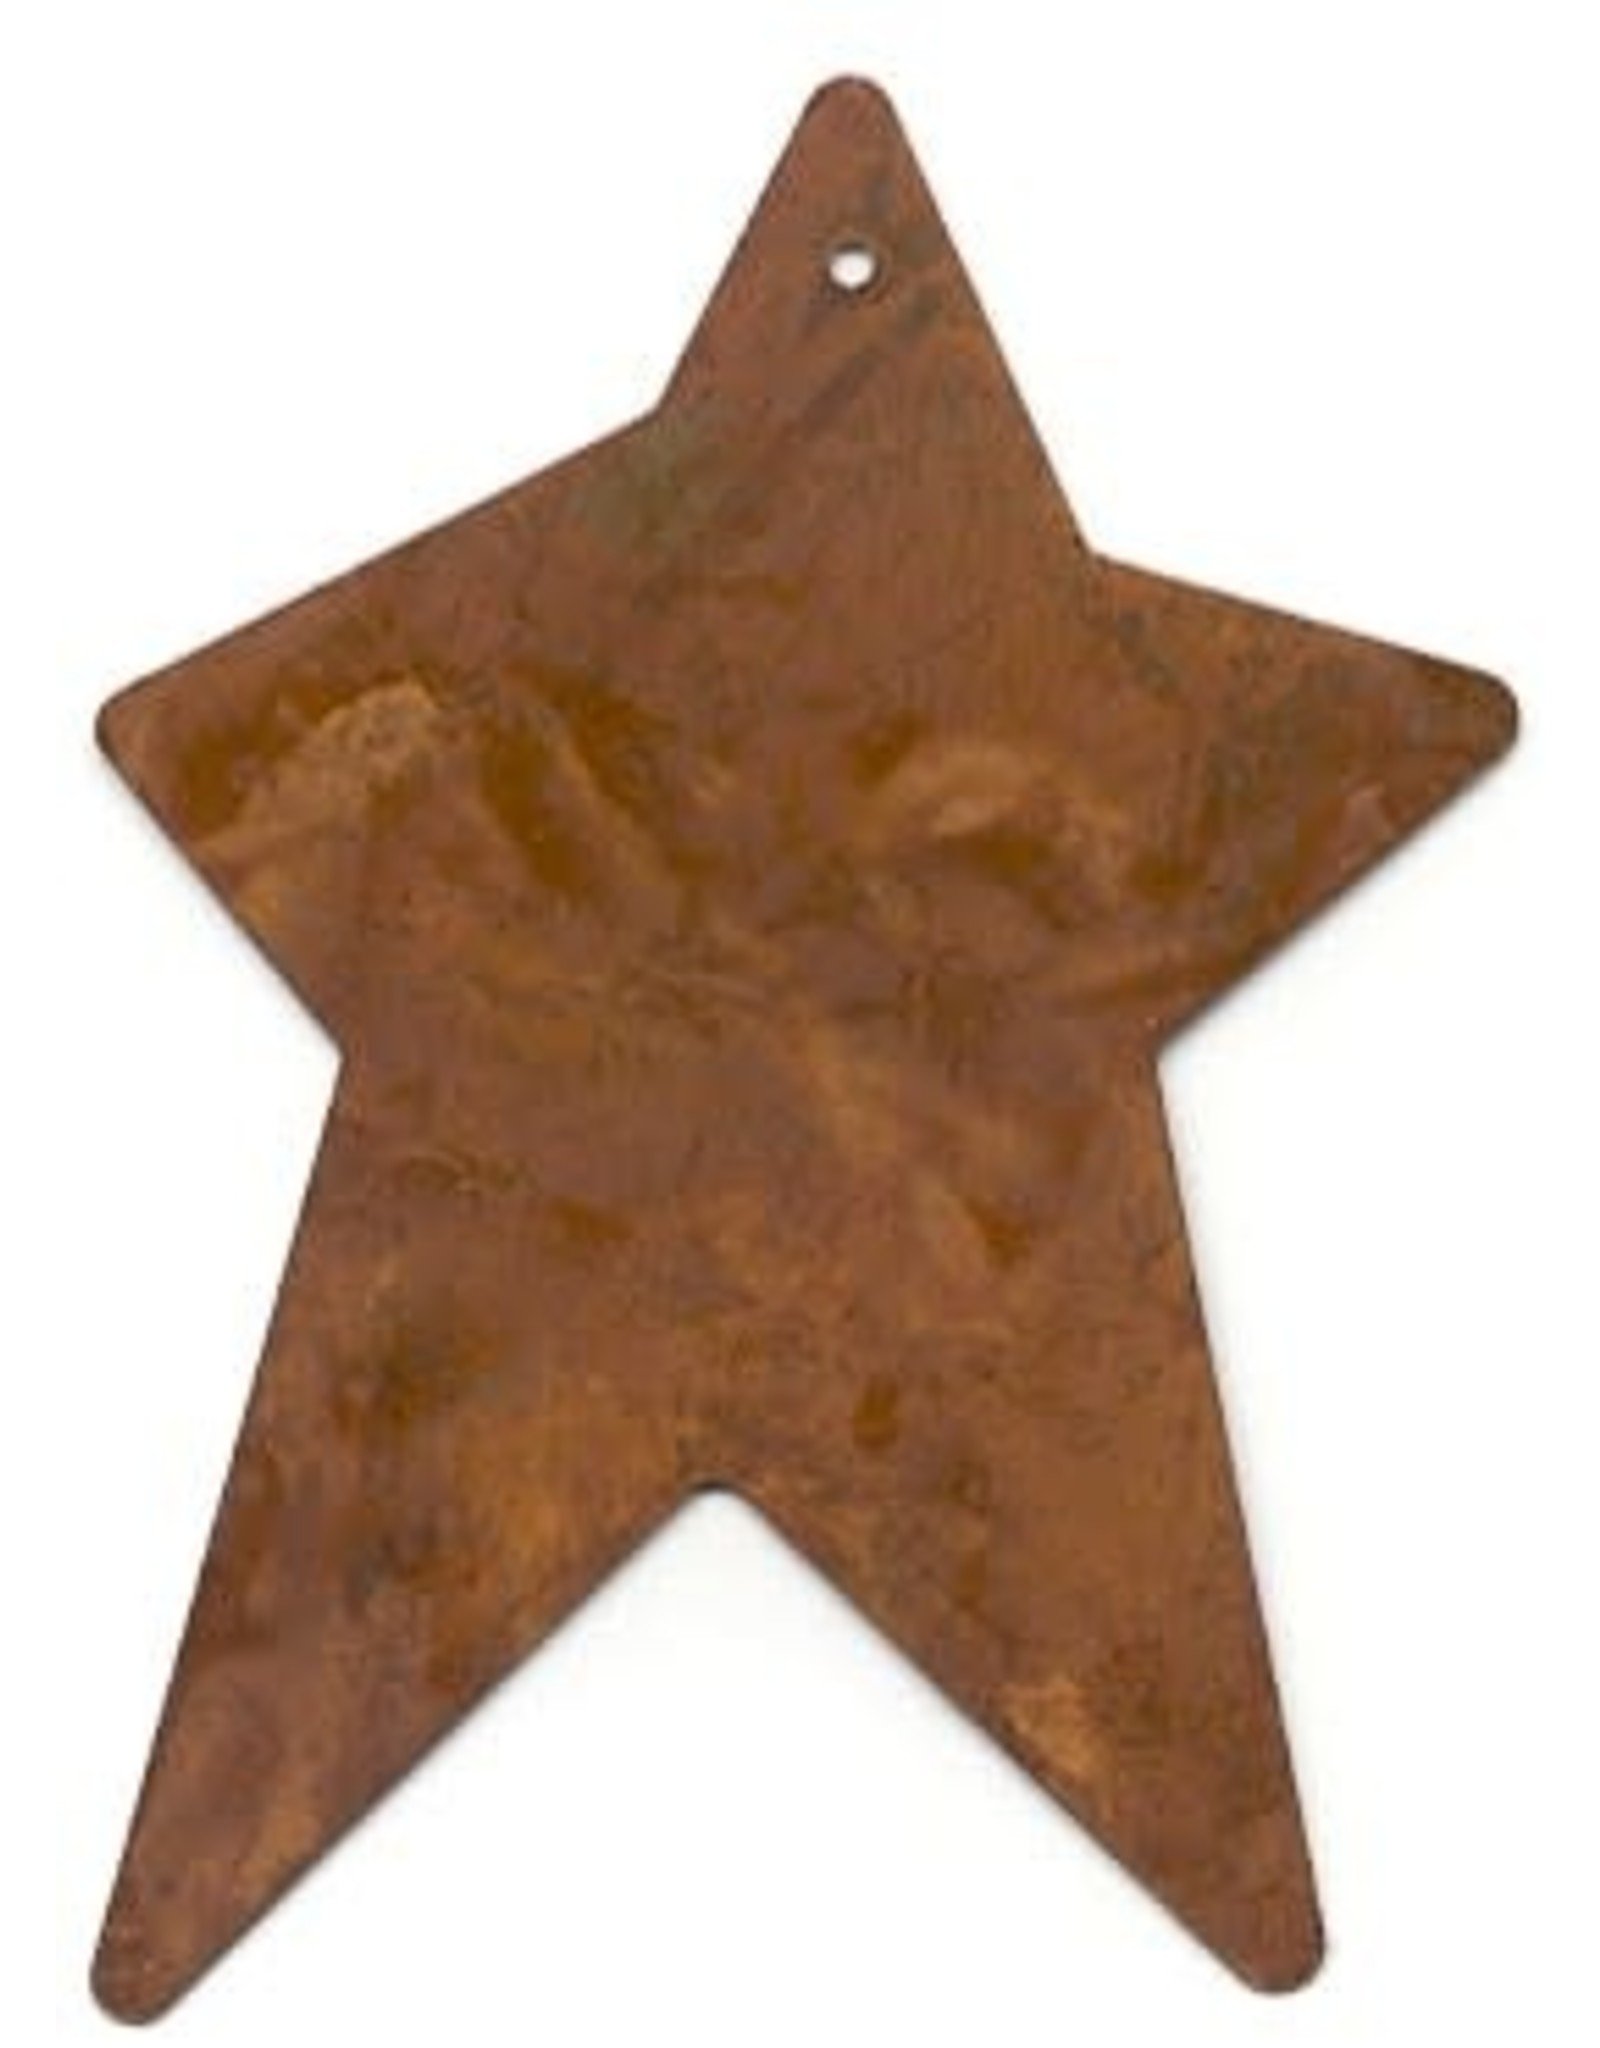 RUSTY TIN STAR 2 1/2" X 3 3/4" (WITH HOLE) PACKAGED 12